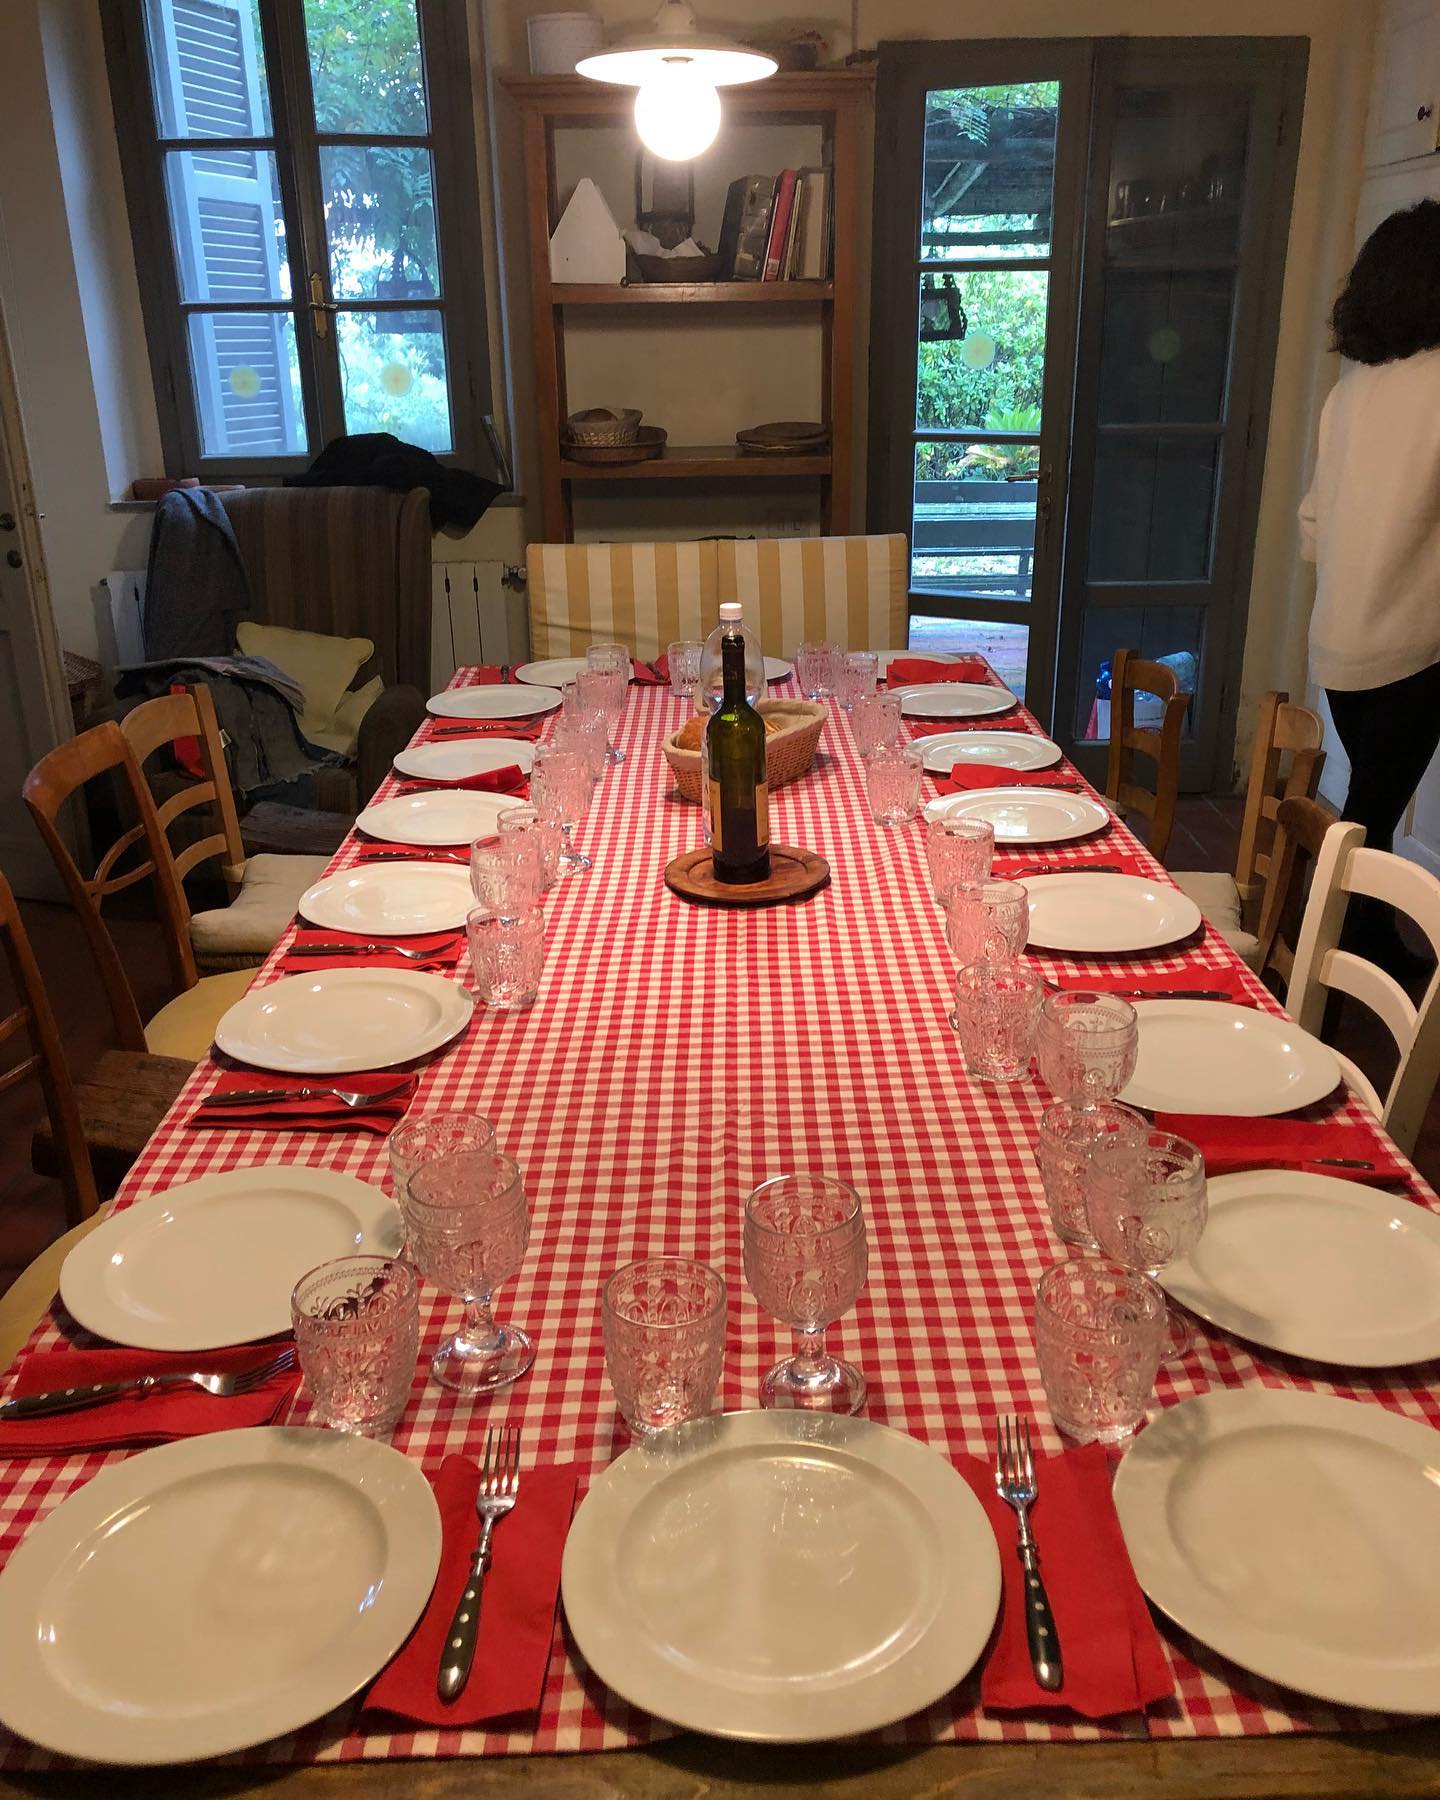 Photo by Dorotea Mercuri on May 16 2023. May be an image of 1 person table tablecloth kitchen table and dining table